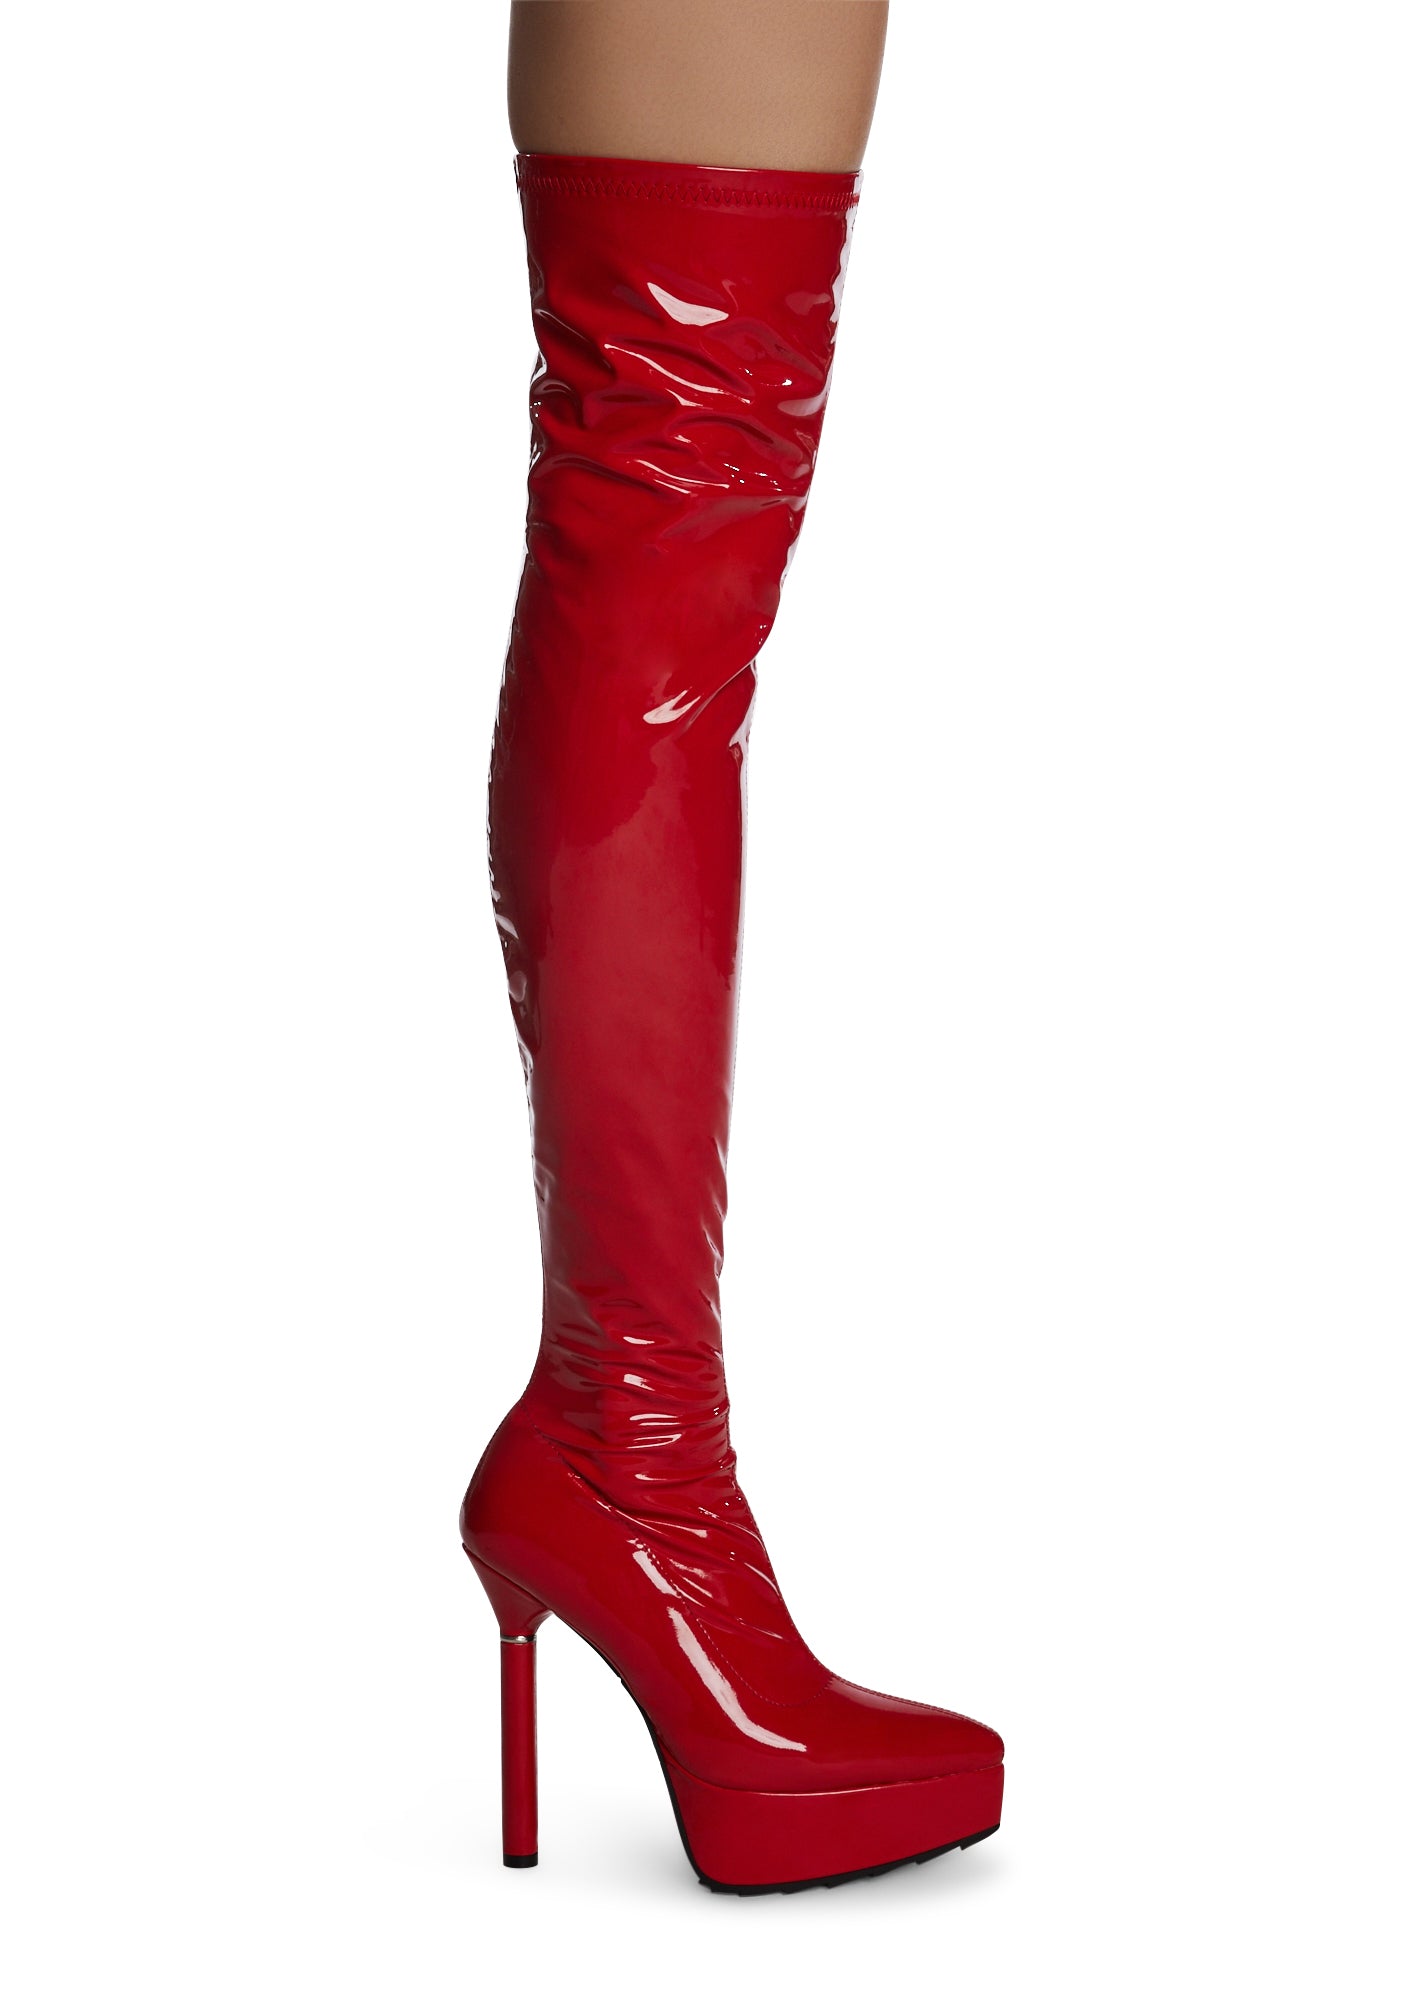 Lamoda Patent Vegan Leather Thigh High Boots - Red